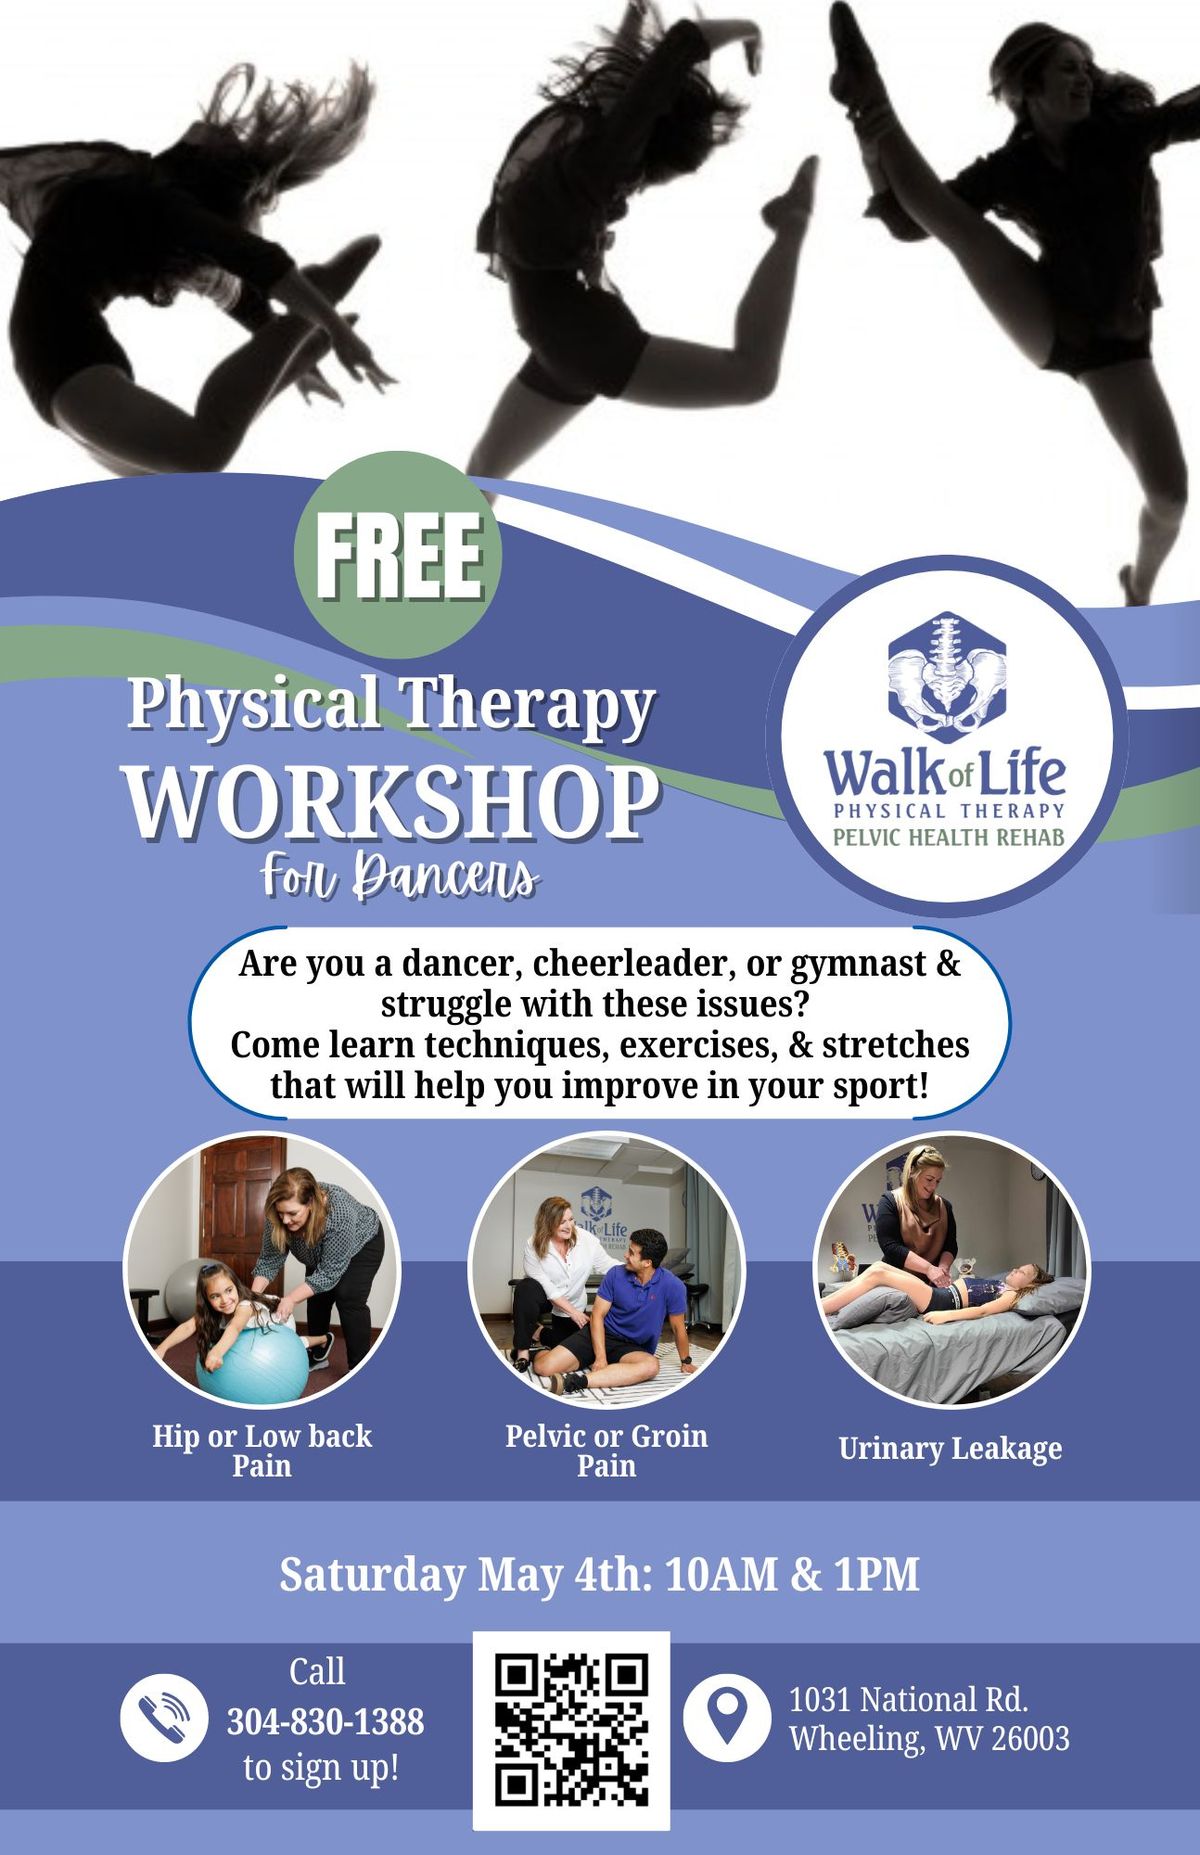 Walk of Life Physical Therapy Workshop for Dancers